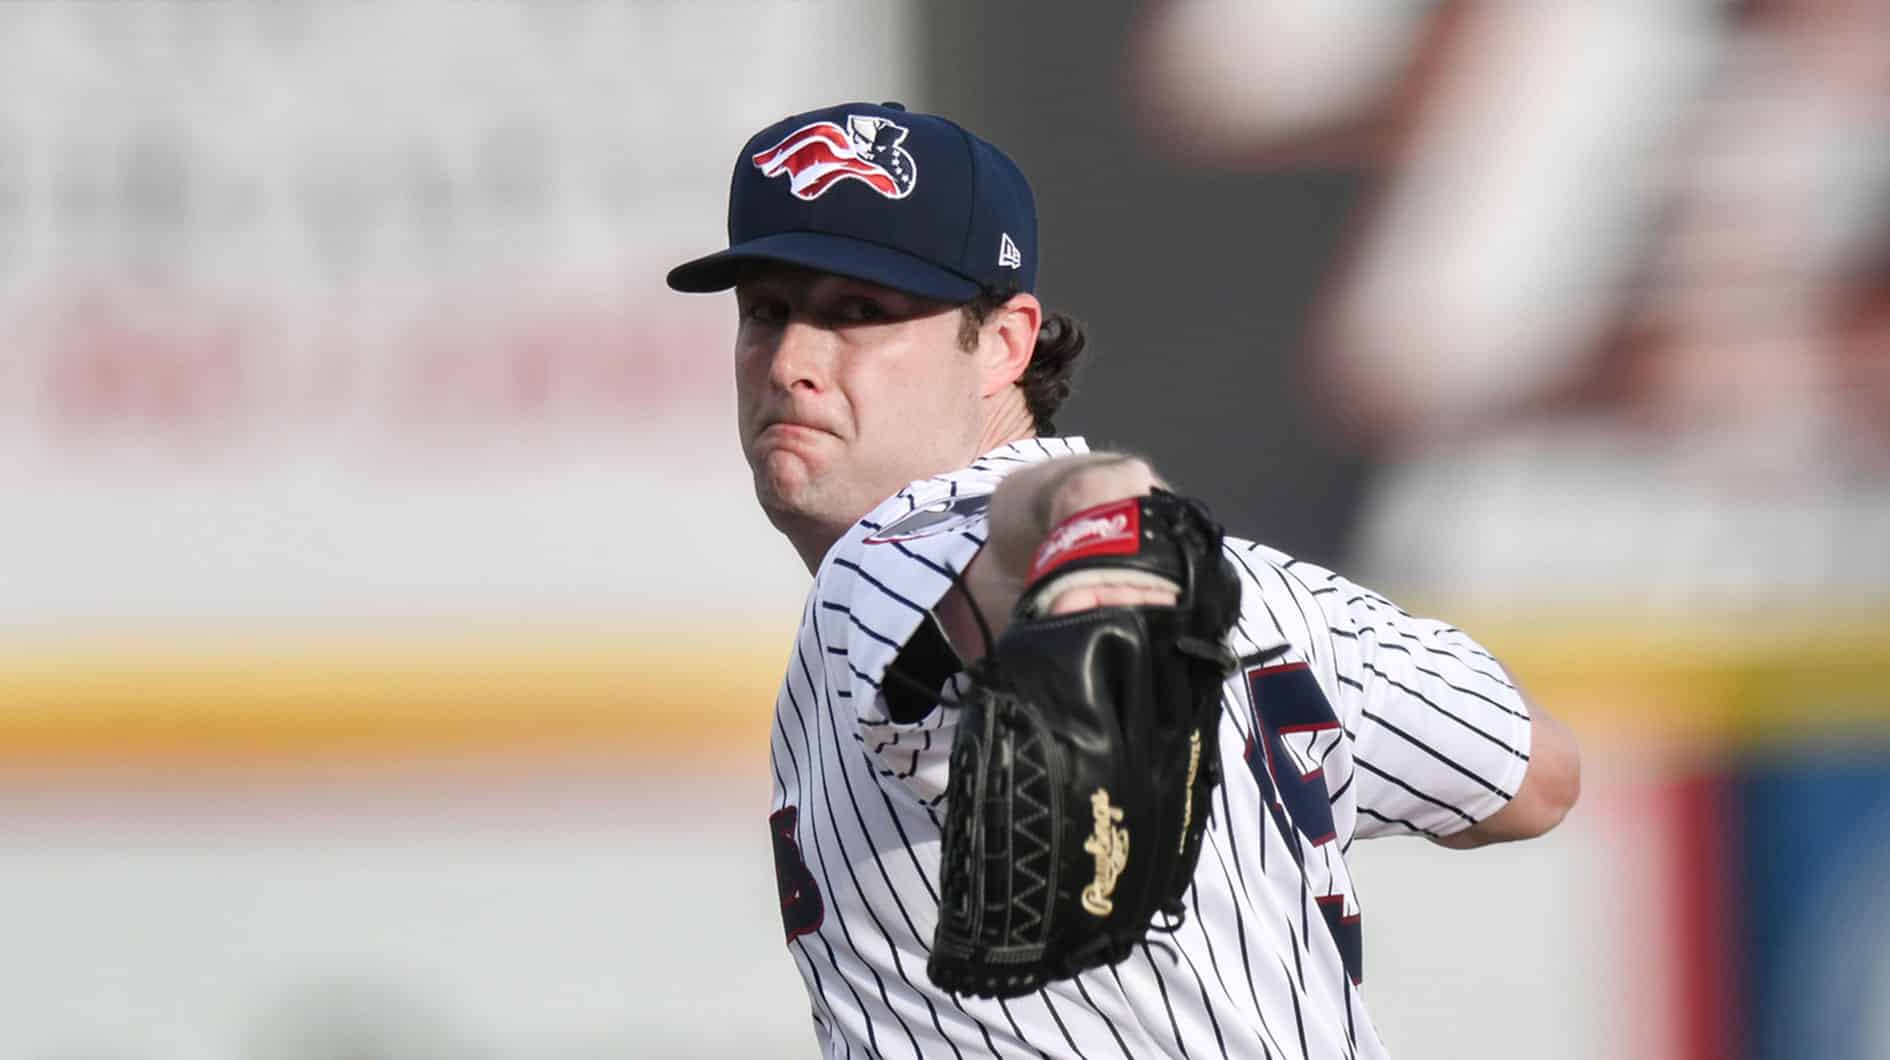  New York Yankees pitcher Gerrit Cole pitches during a MLB rehab assignment with the Somerset Patriots against the Hartford Yard Goats at TD Bank Ballpark. 